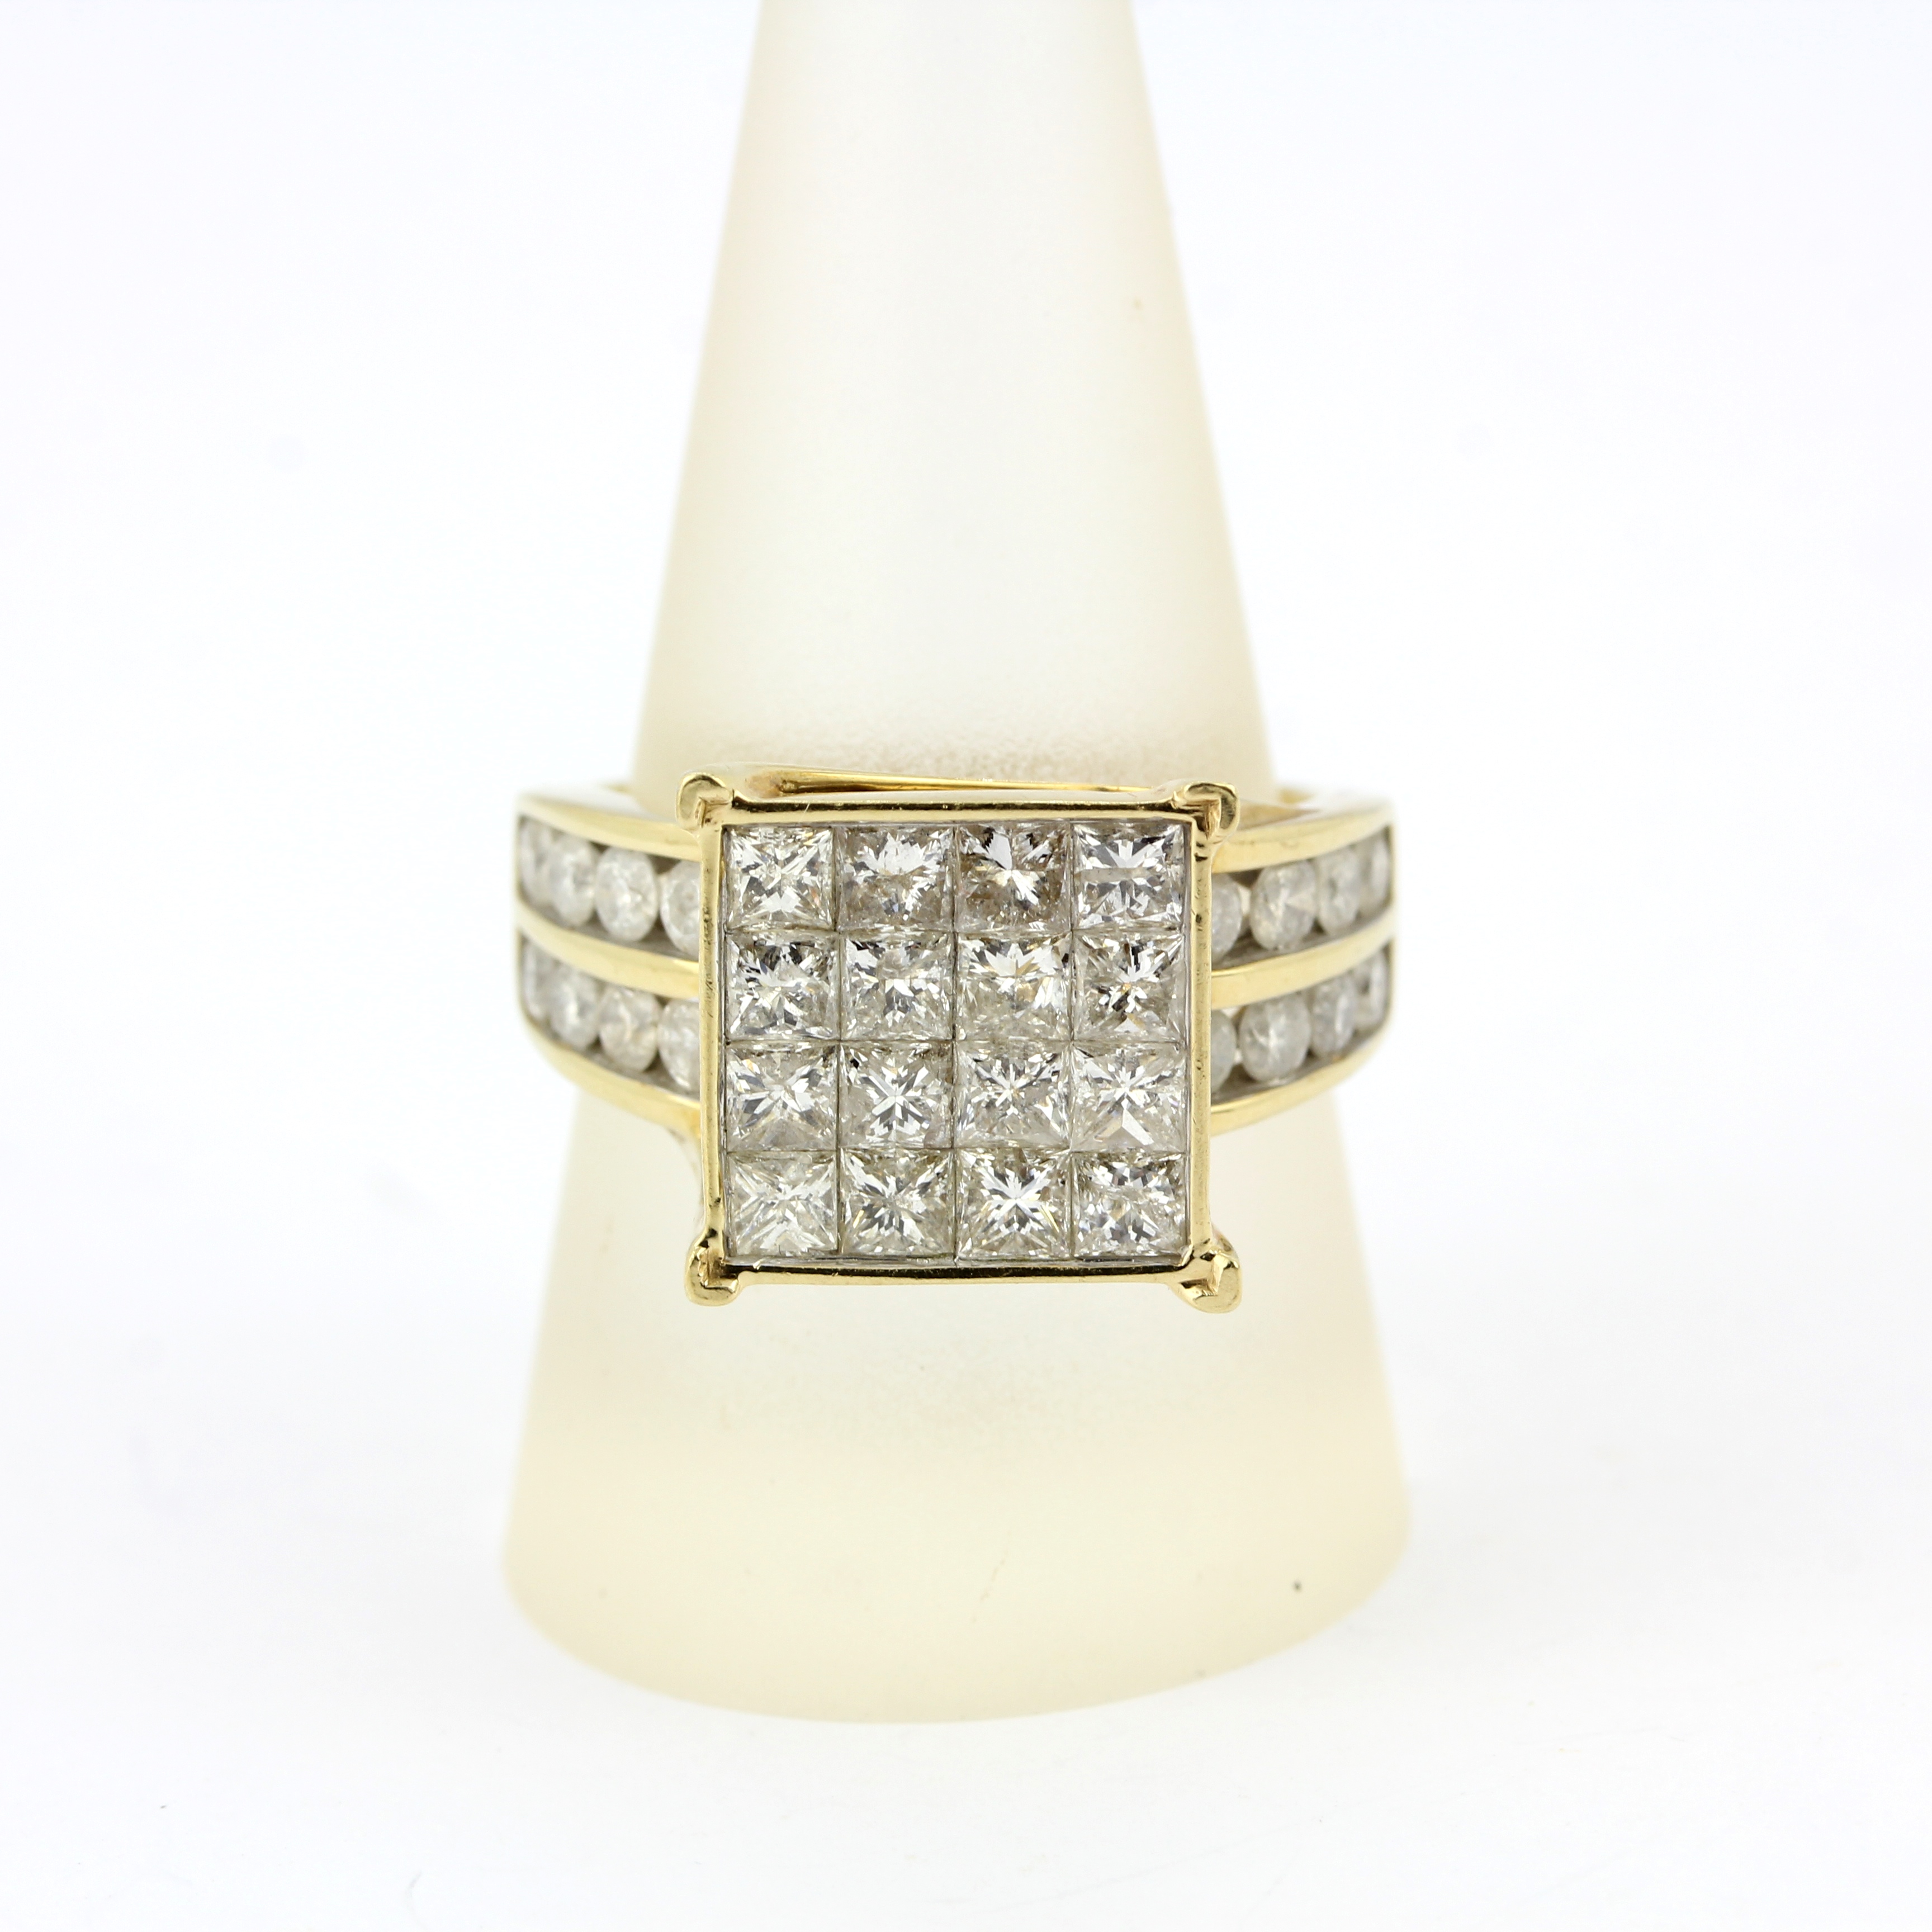 A 9ct yellow gold ring set with princess and brilliant cut diamonds, approx. 4ct overall, ring